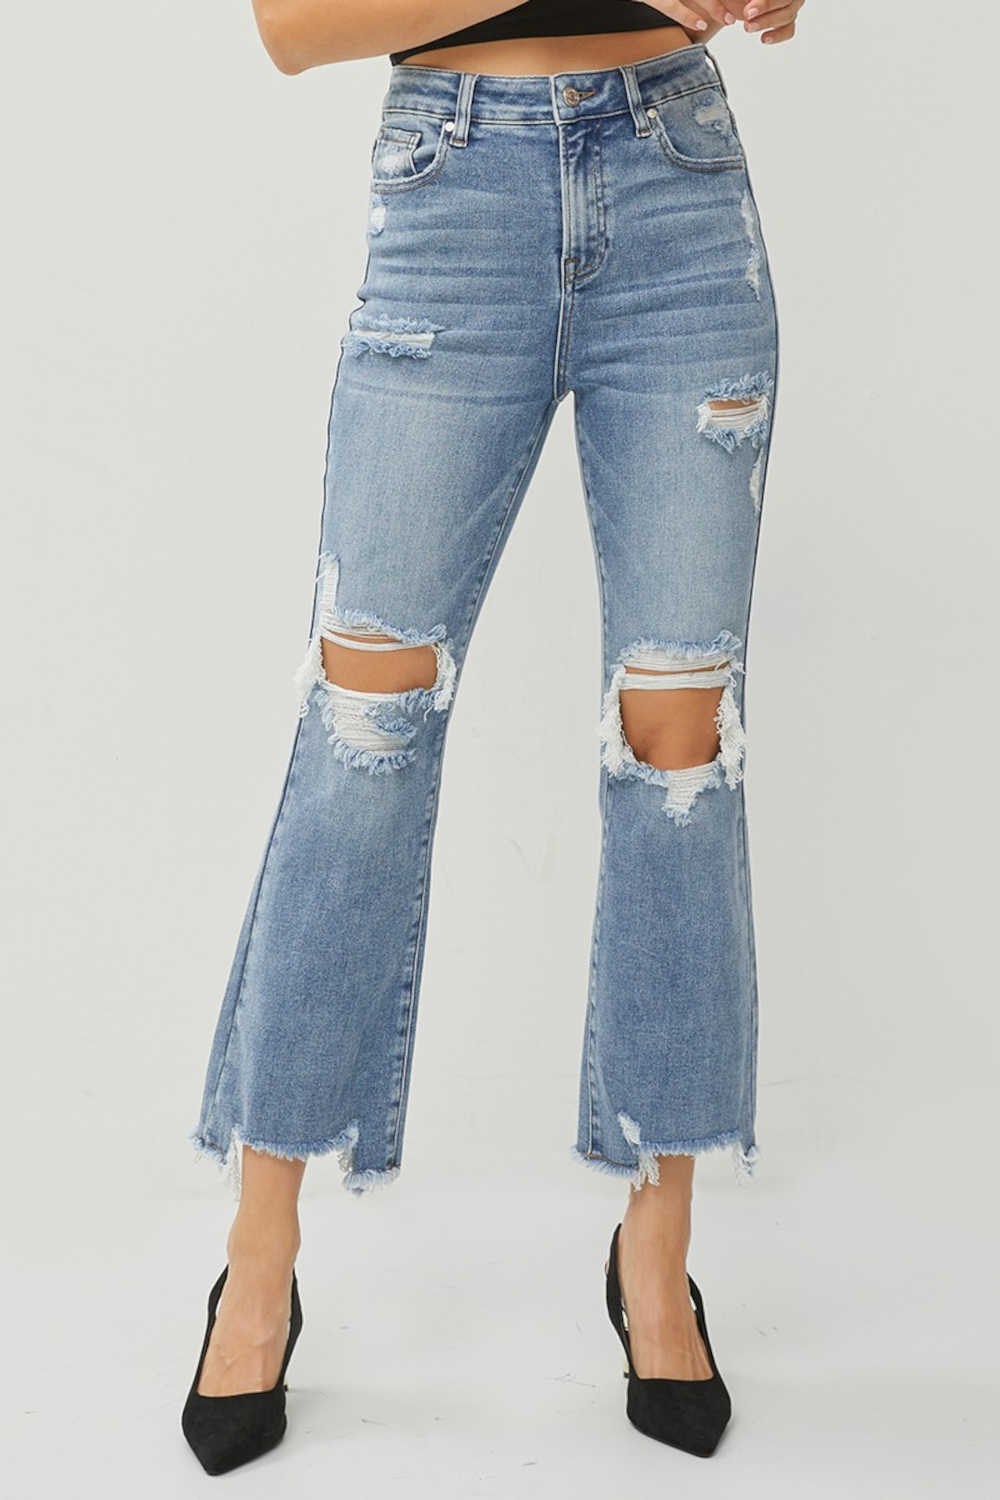 Risen Jeans High Rise Ankle Flare